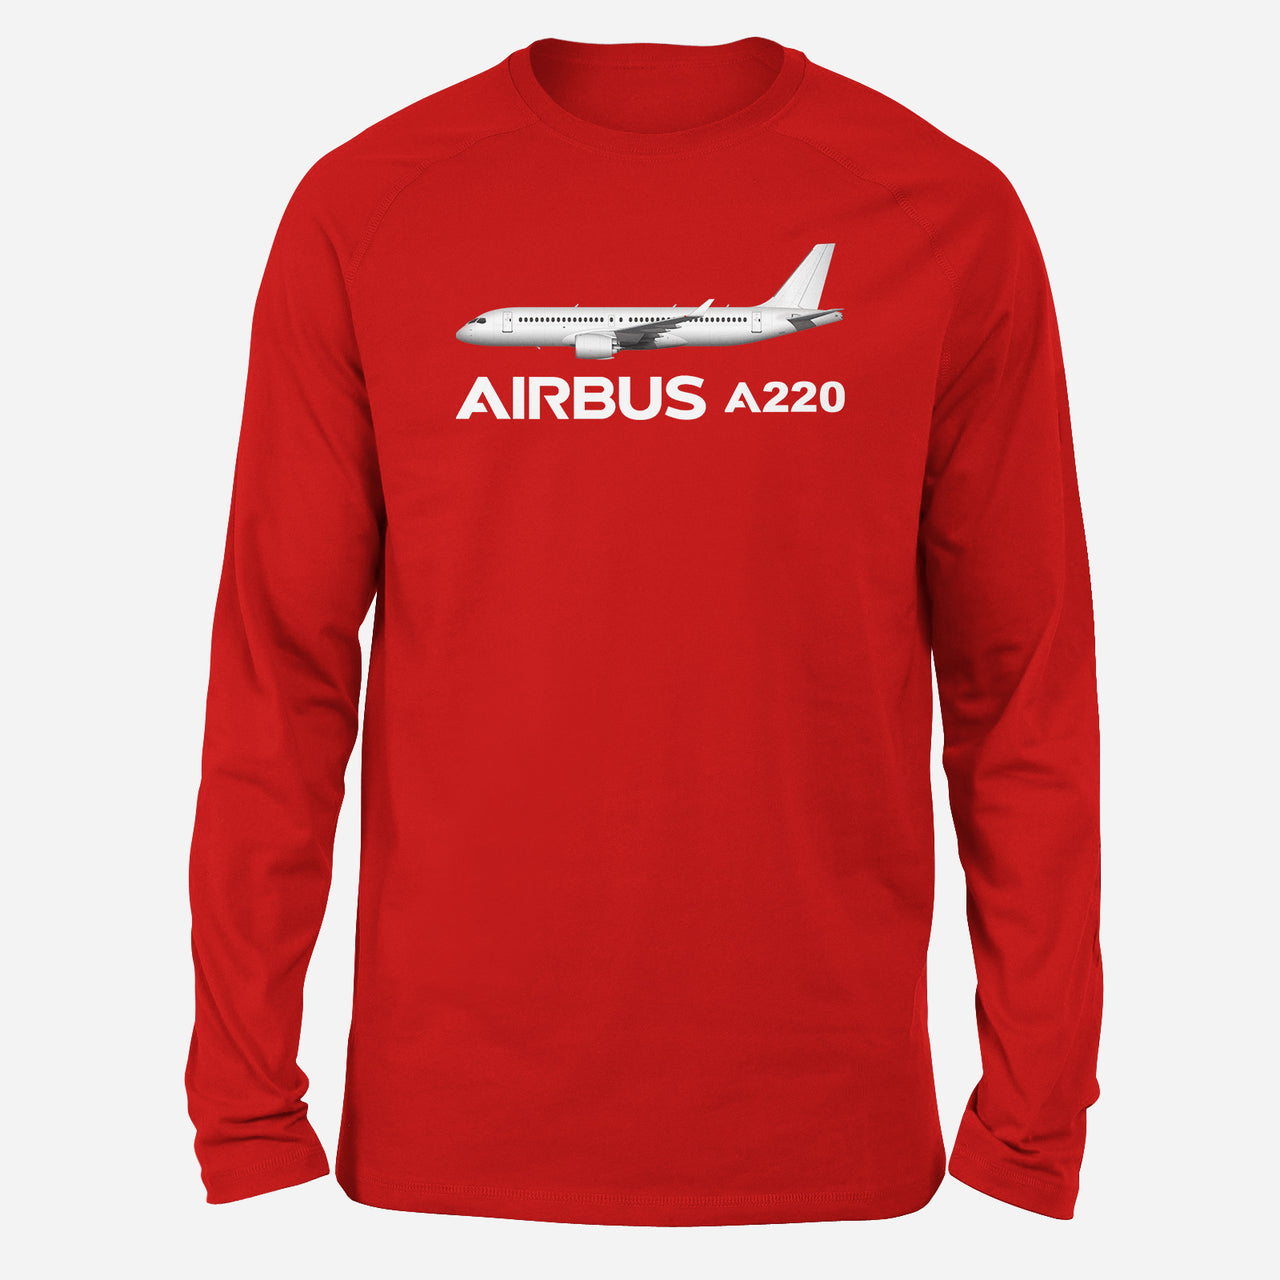 The Airbus A220 Designed Long-Sleeve T-Shirts